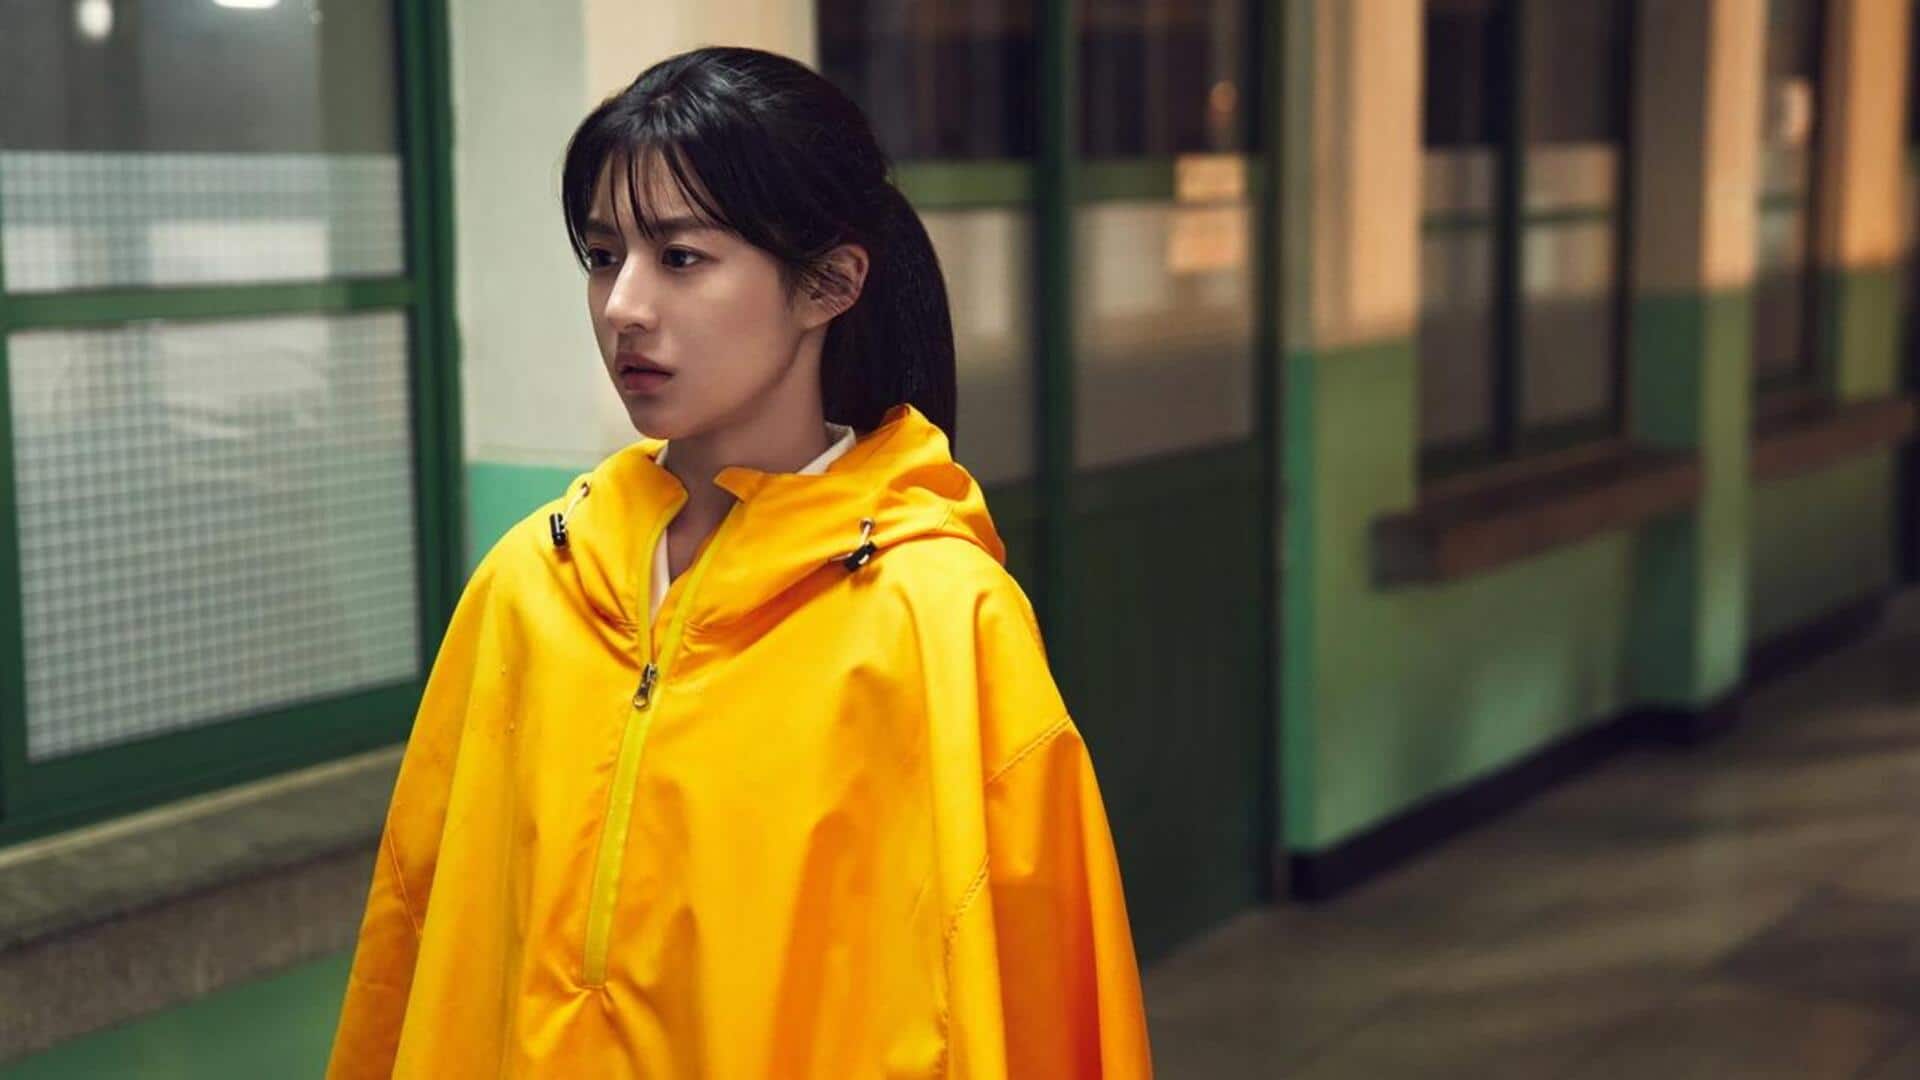 Go Yoon-jung to star in 'Hospital Playlist' spinoff